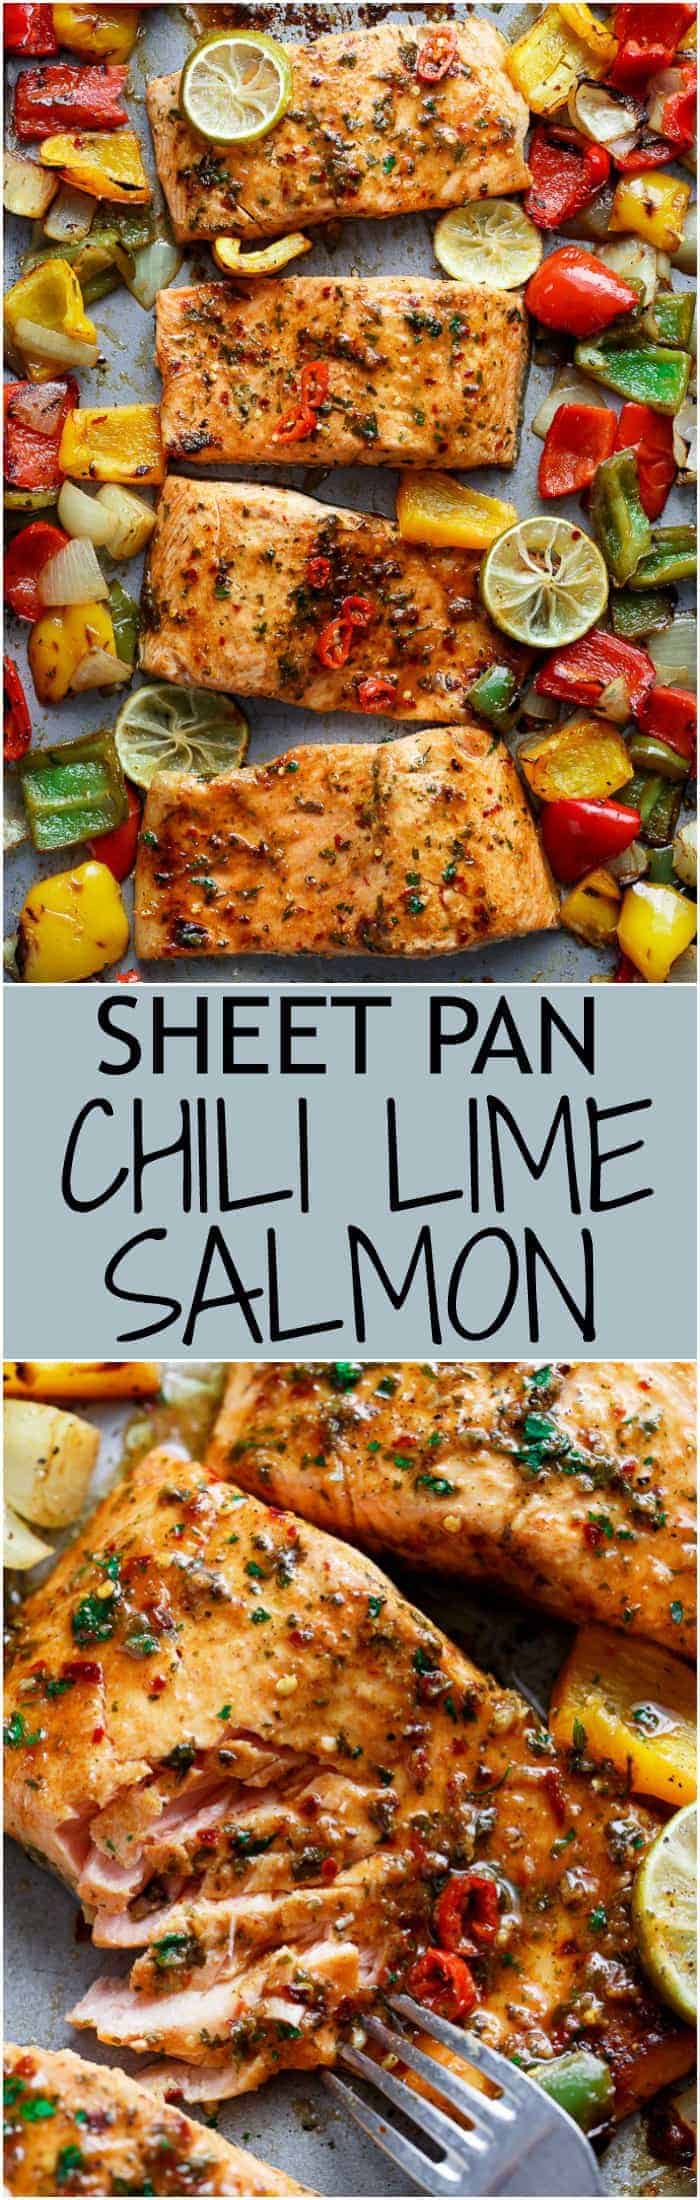 Sheet Pan Chili Lime Salmon with Fajita flavours, and a charred, crispy roasted trio of peppers for an easy and healthy weeknight meal! | https://cafedelites.com